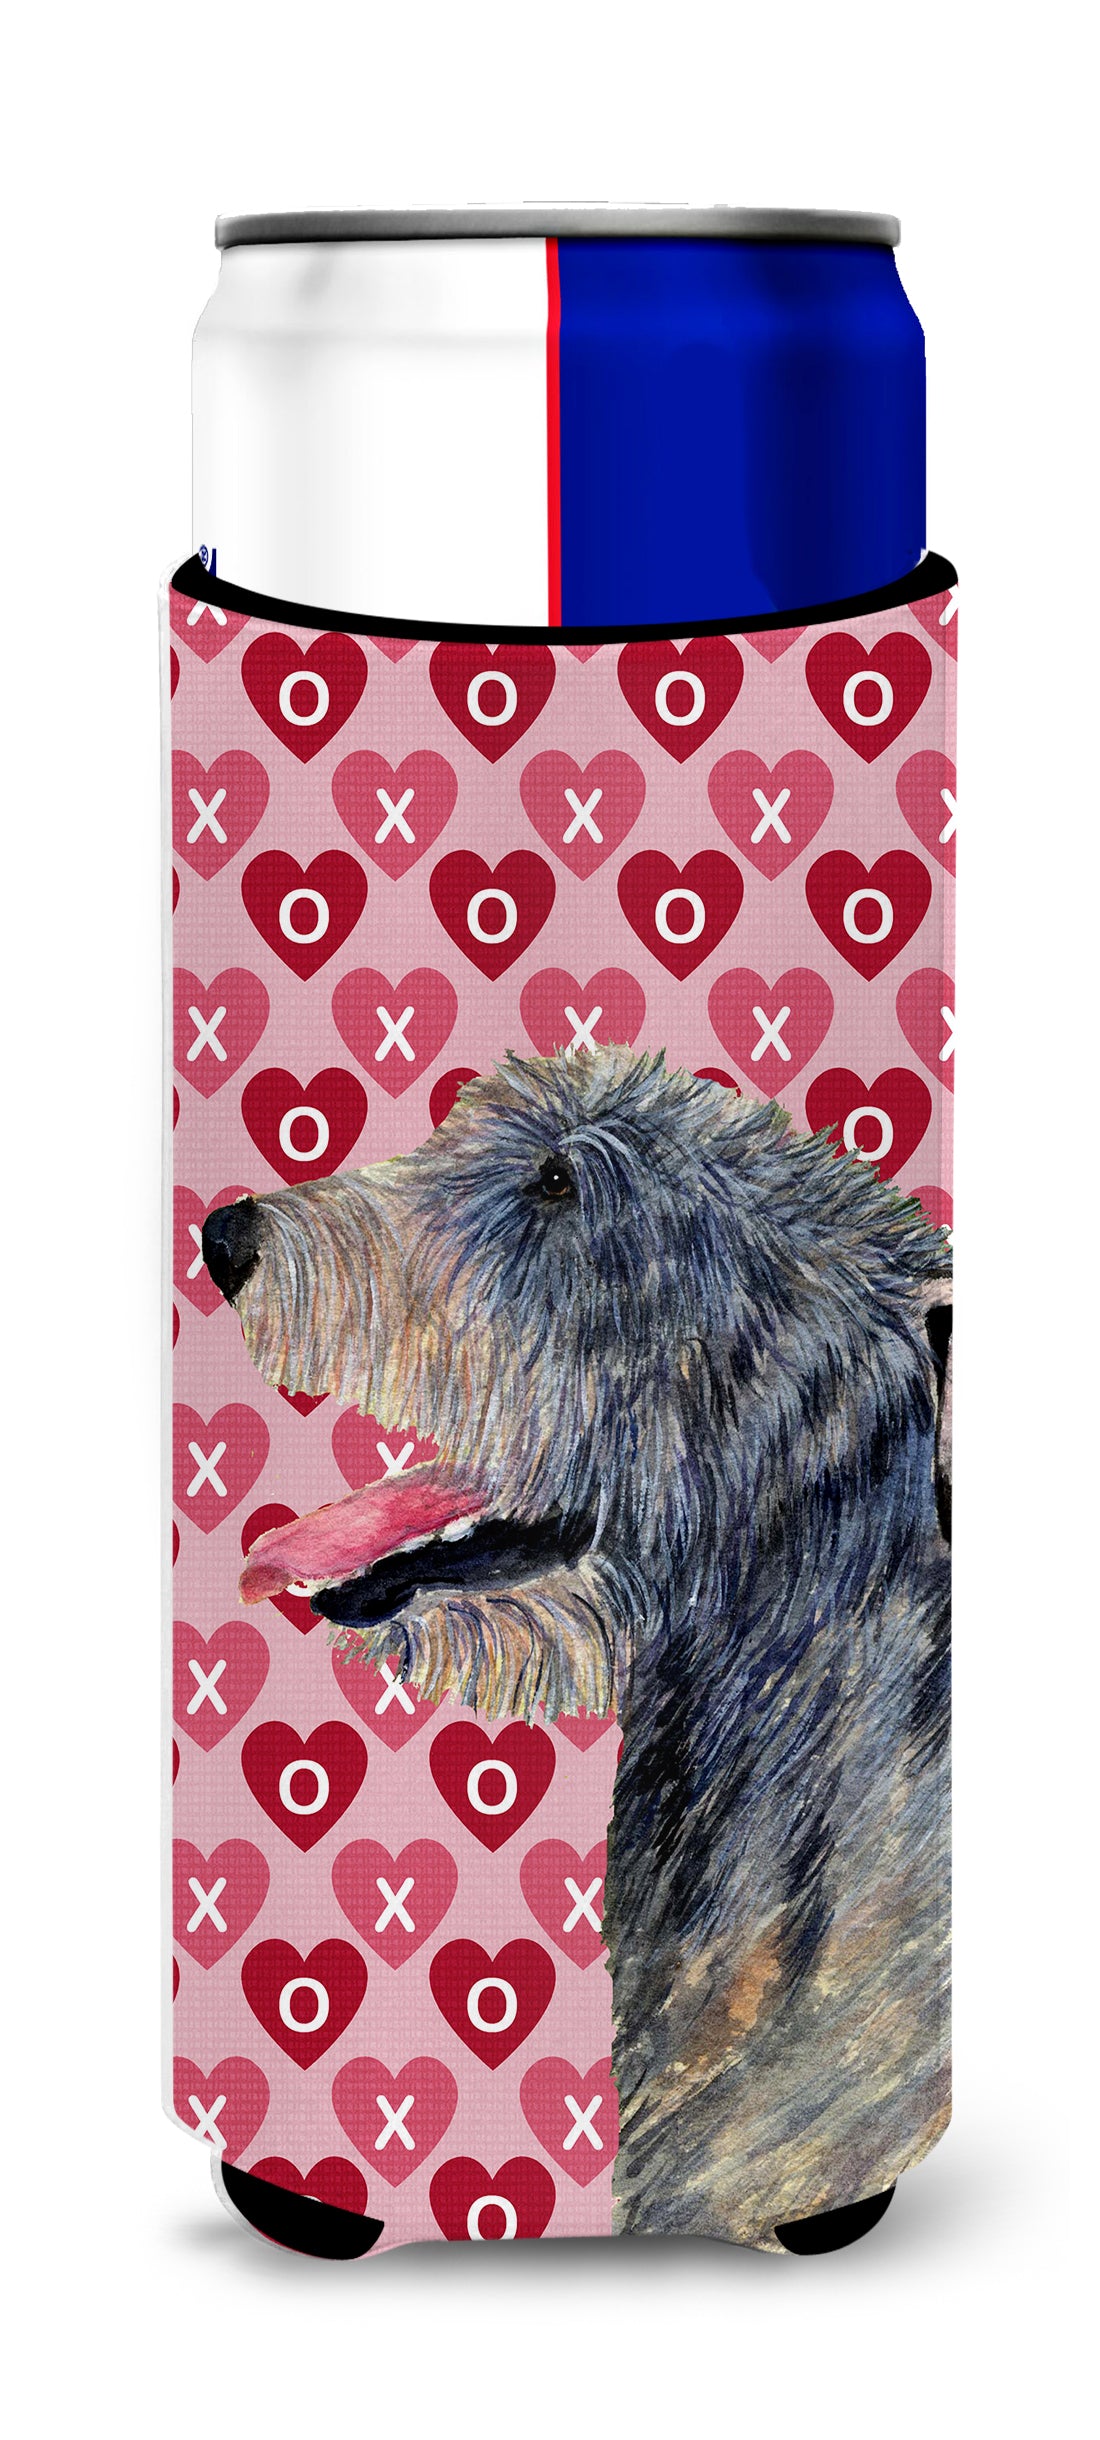 Irish Wolfhound Hearts Love and Valentine's Day Portrait Ultra Beverage Insulators for slim cans SS4506MUK.